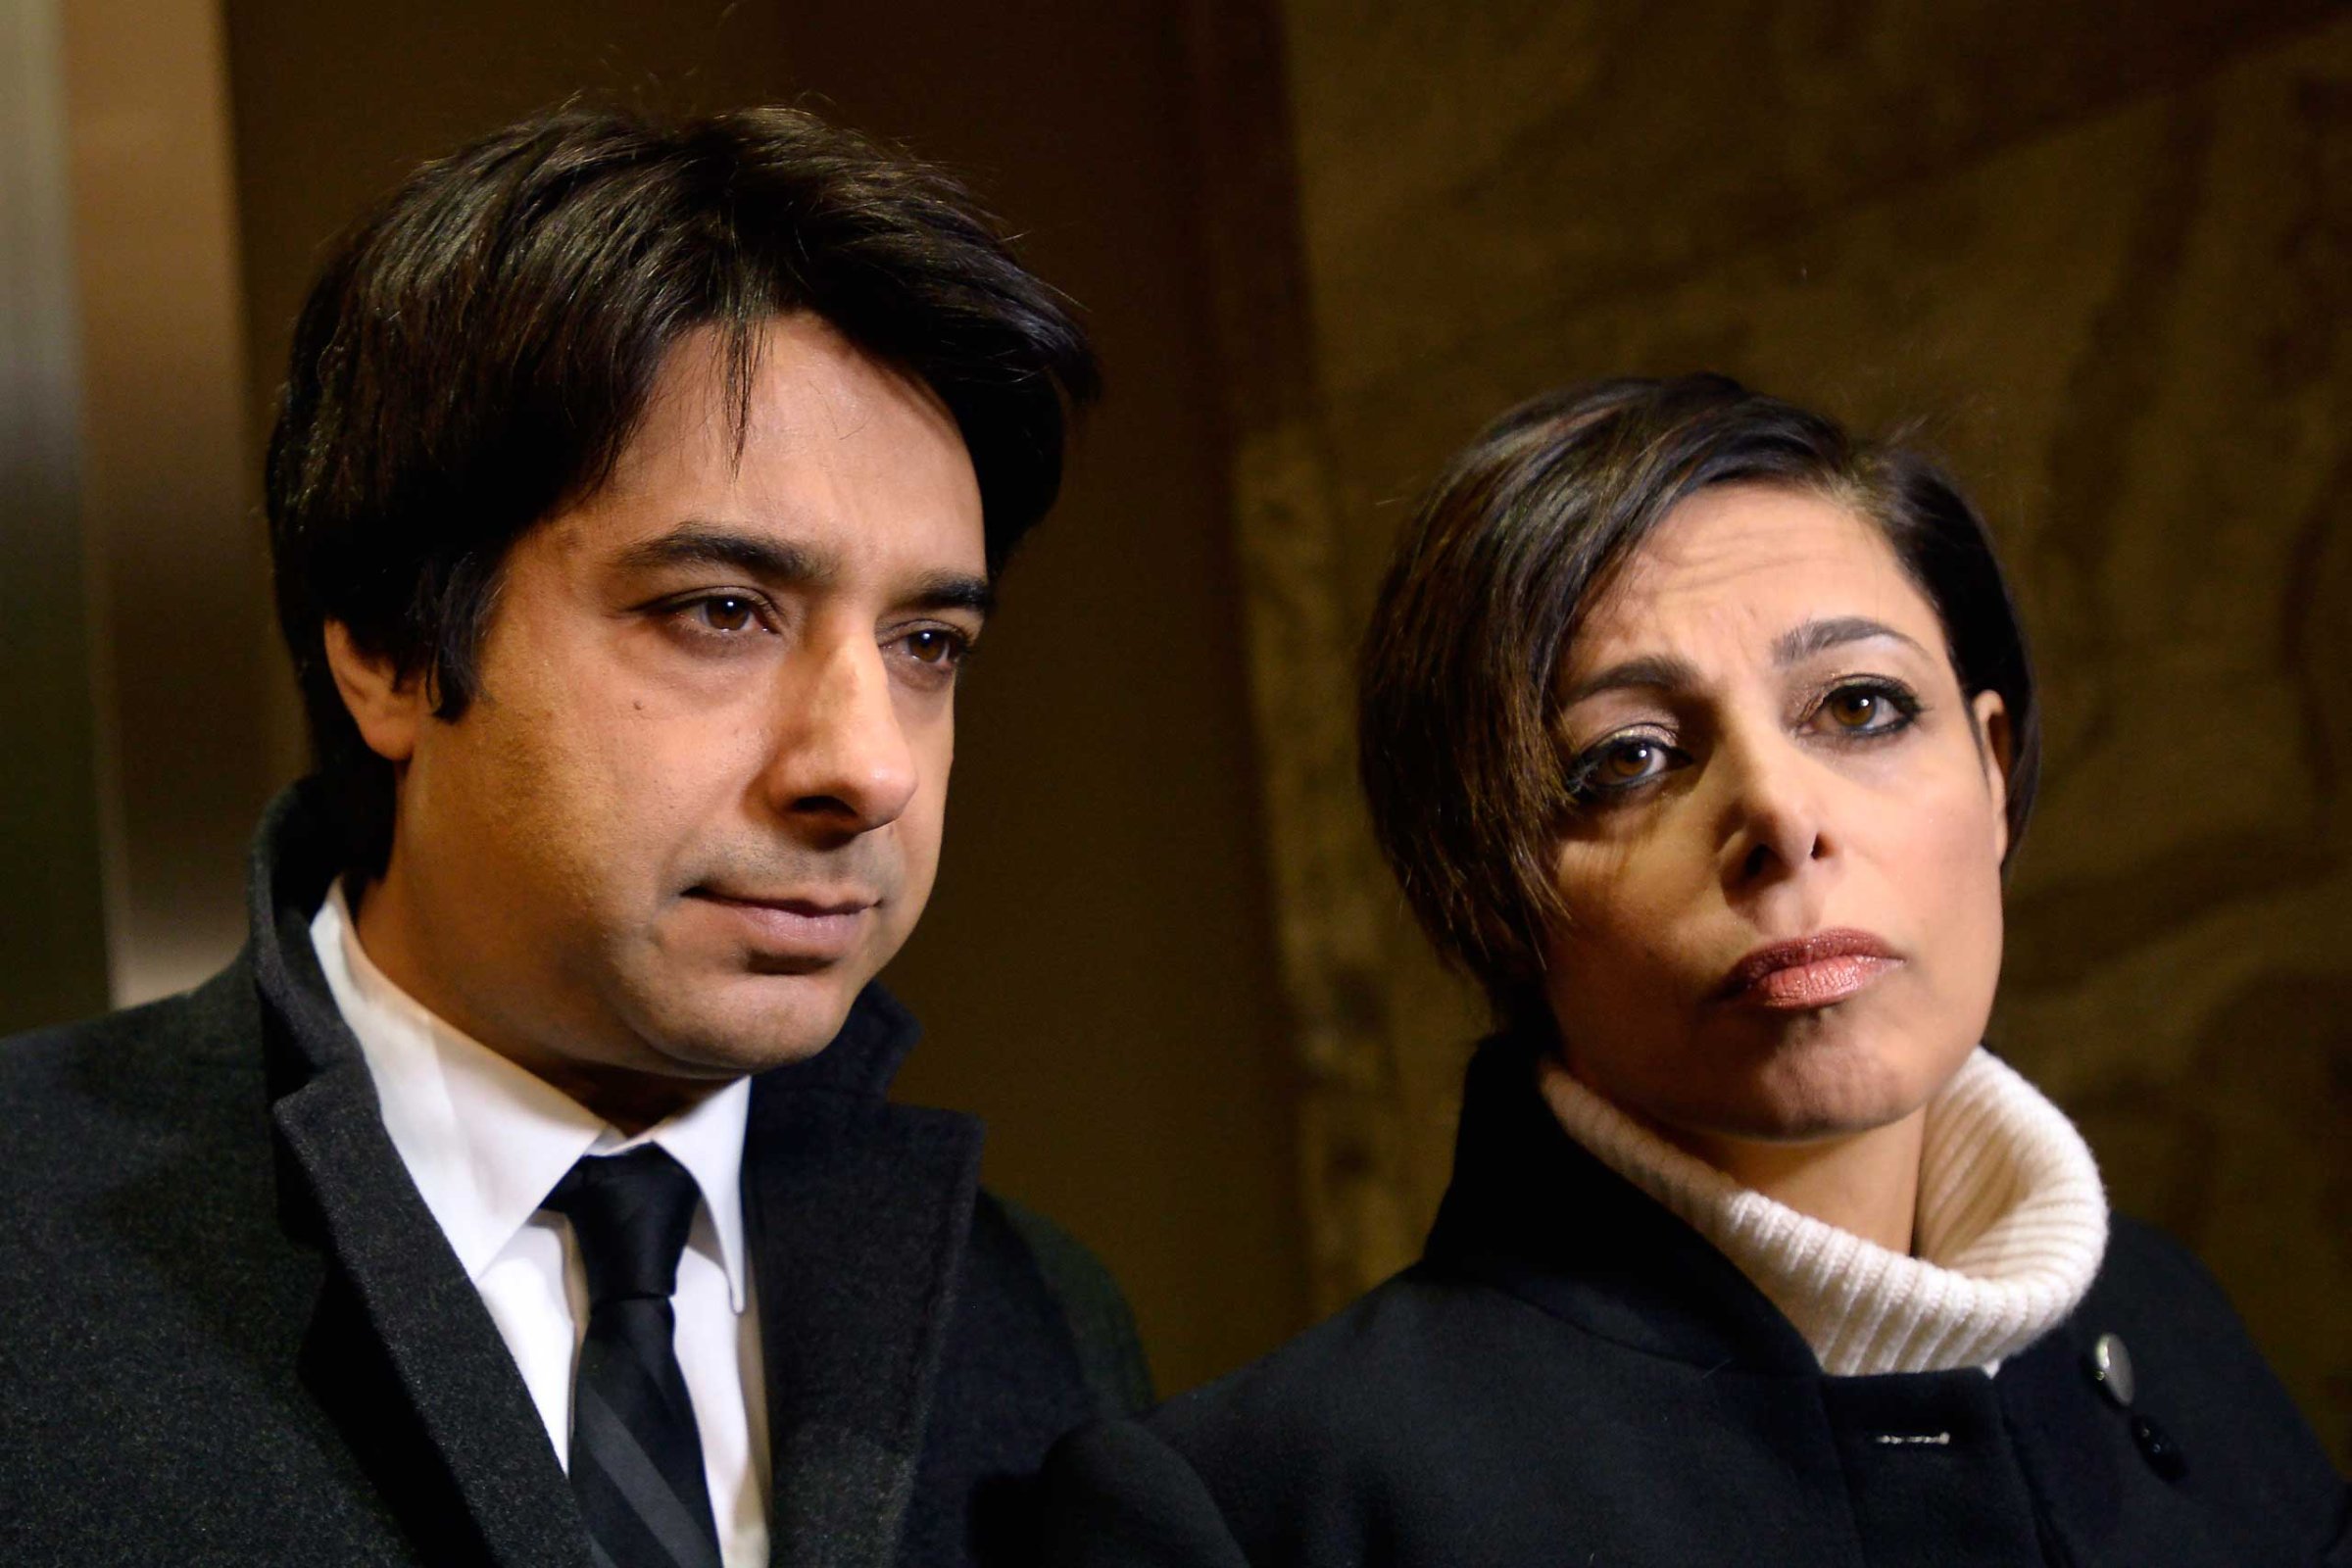 Former CBC radio host Jian Ghomeshi, left, and his lawyer, Marie Henein, arrive at court in Toronto on Jan. 8, 2015.